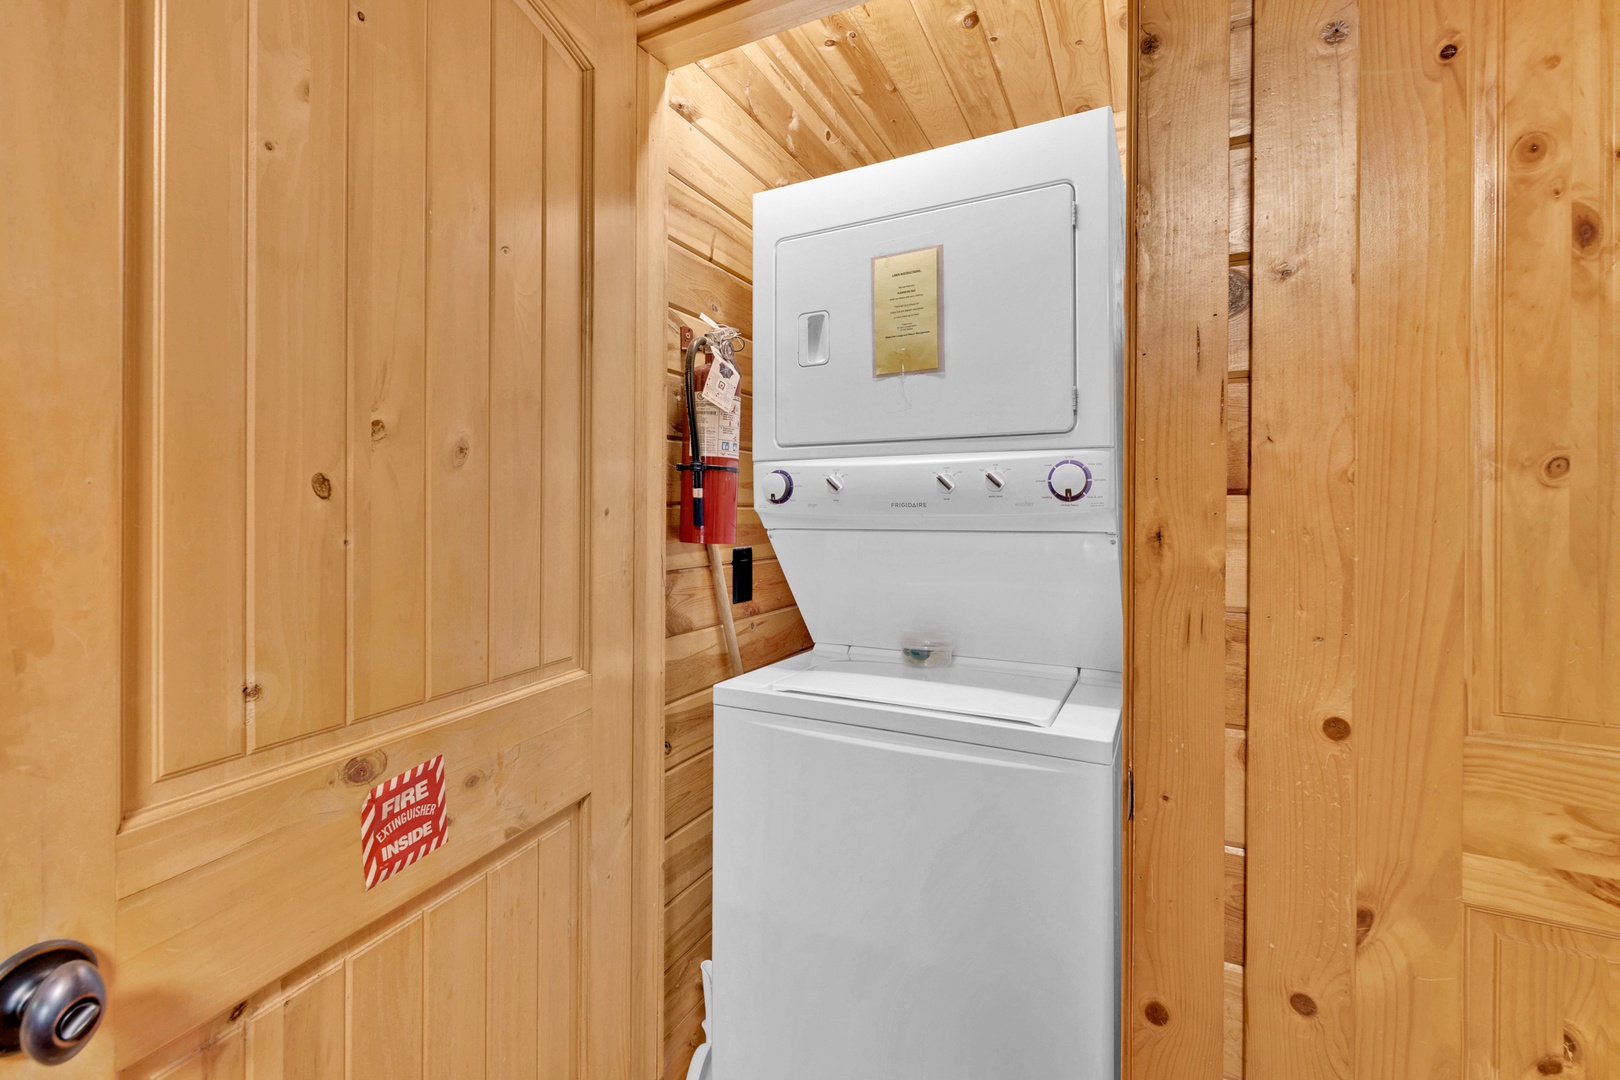 Private laundry is available for your stay, located off the kitchen